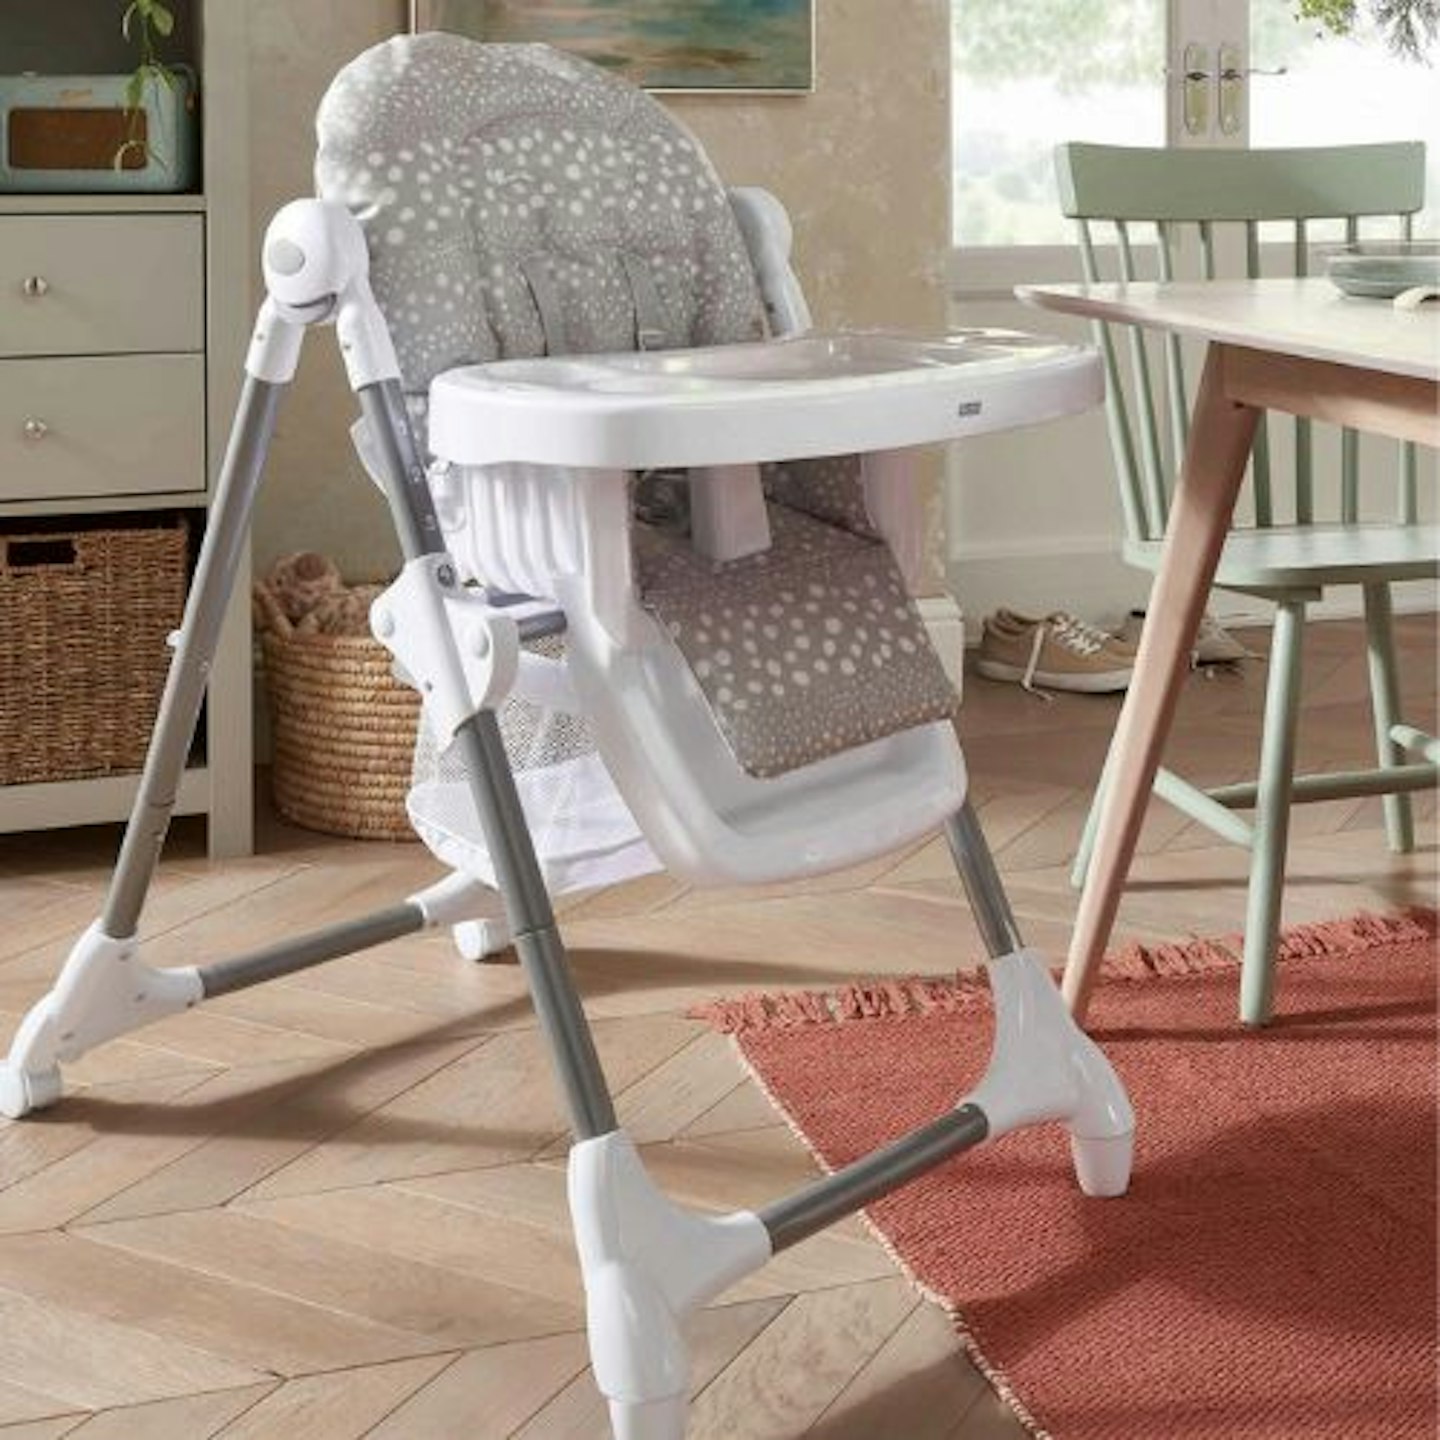 Snax Adjustable Highchair with Removable Tray Insert